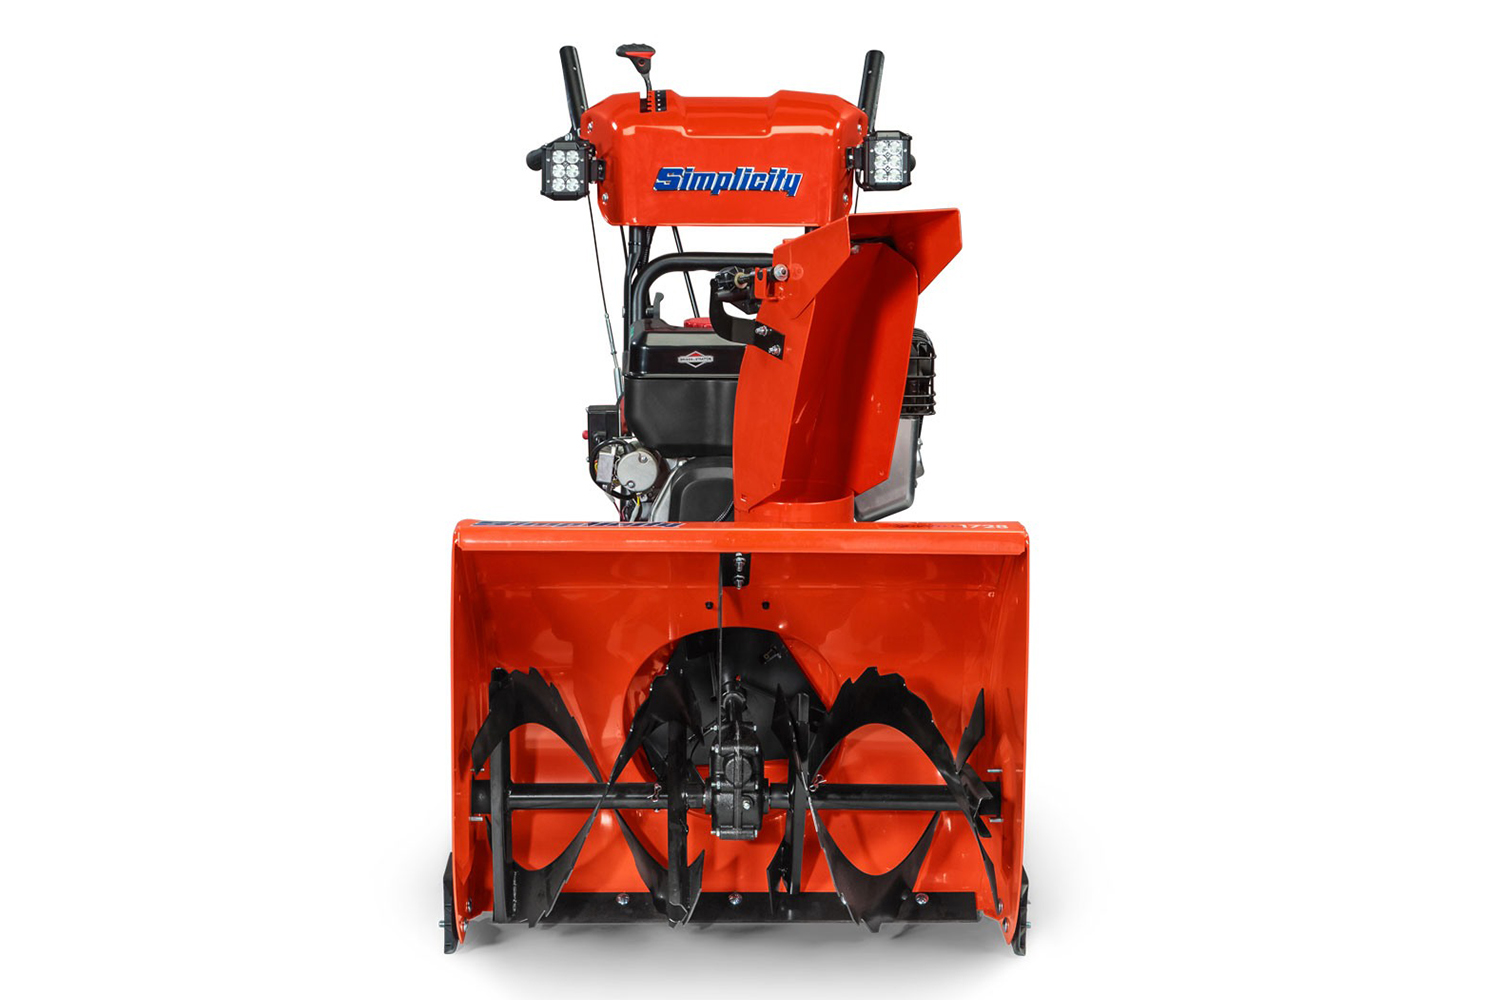 SIMPLICITY SIGNATURE SERIES DUAL-STAGE SNOW BLOWERS 1524<br/>*Model shown in image may vary.